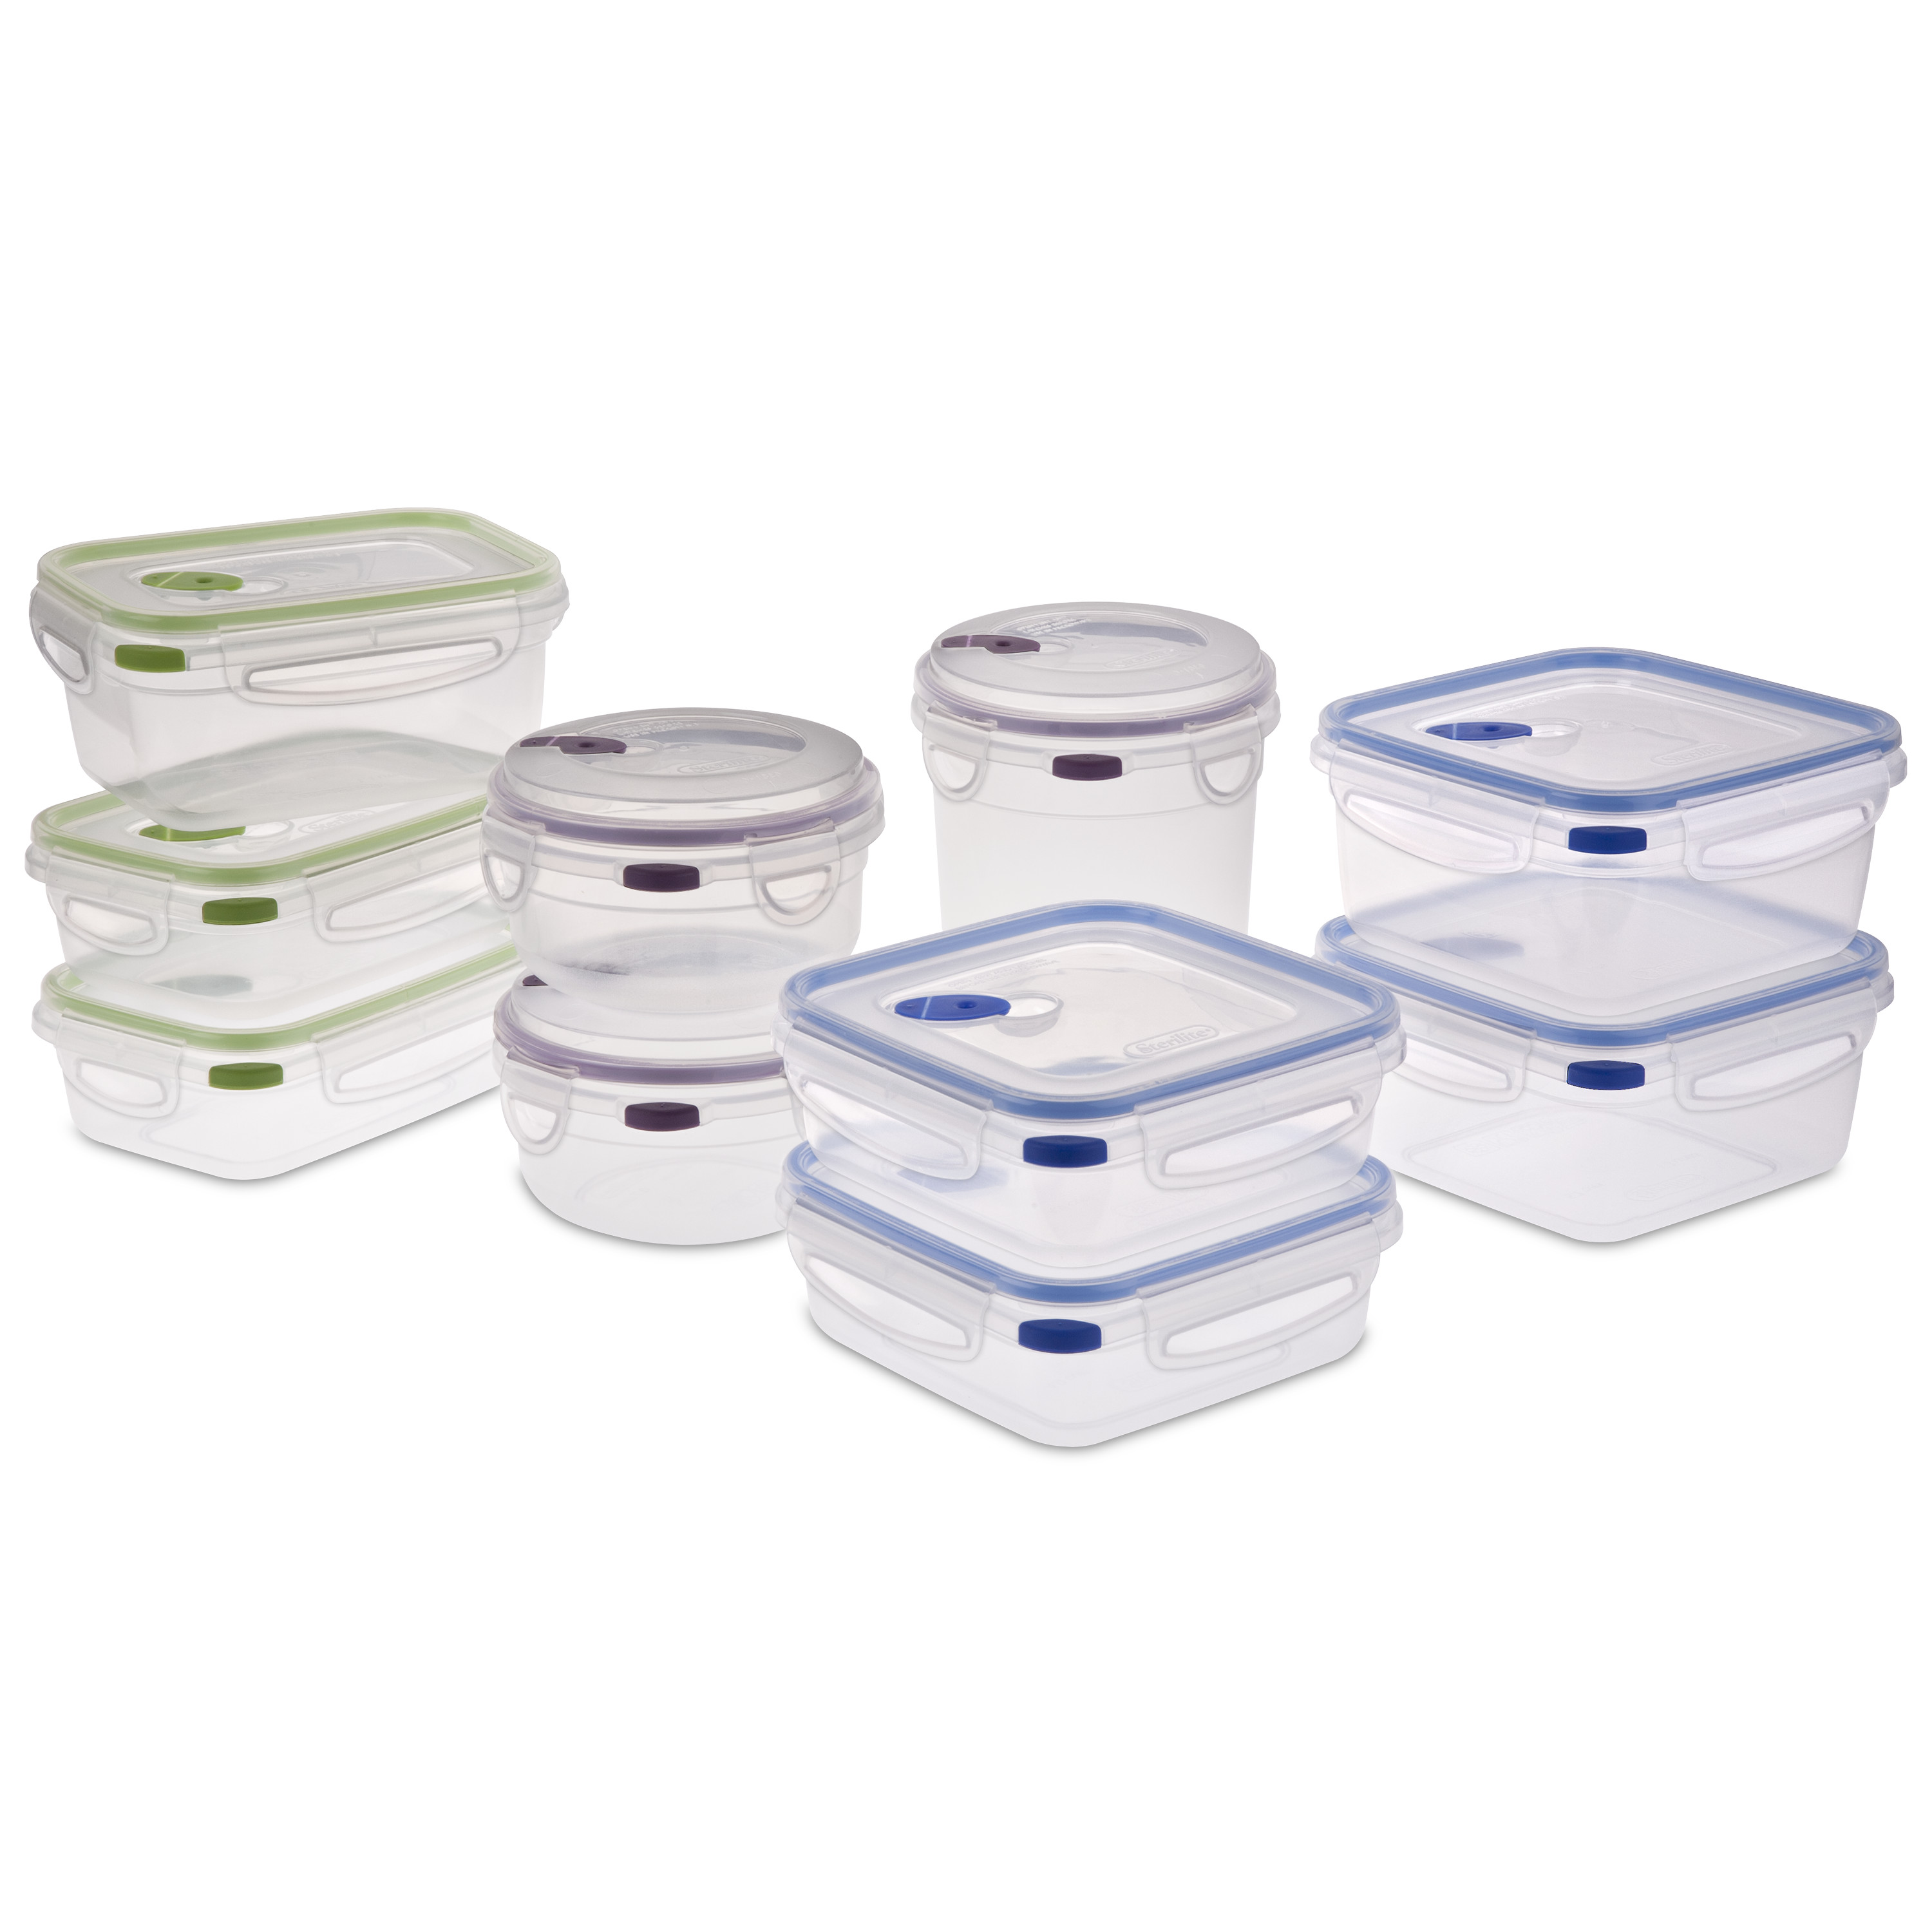 Sterilite, Ultra•Seal™ 20 Piece Set, Clear - image 2 of 7